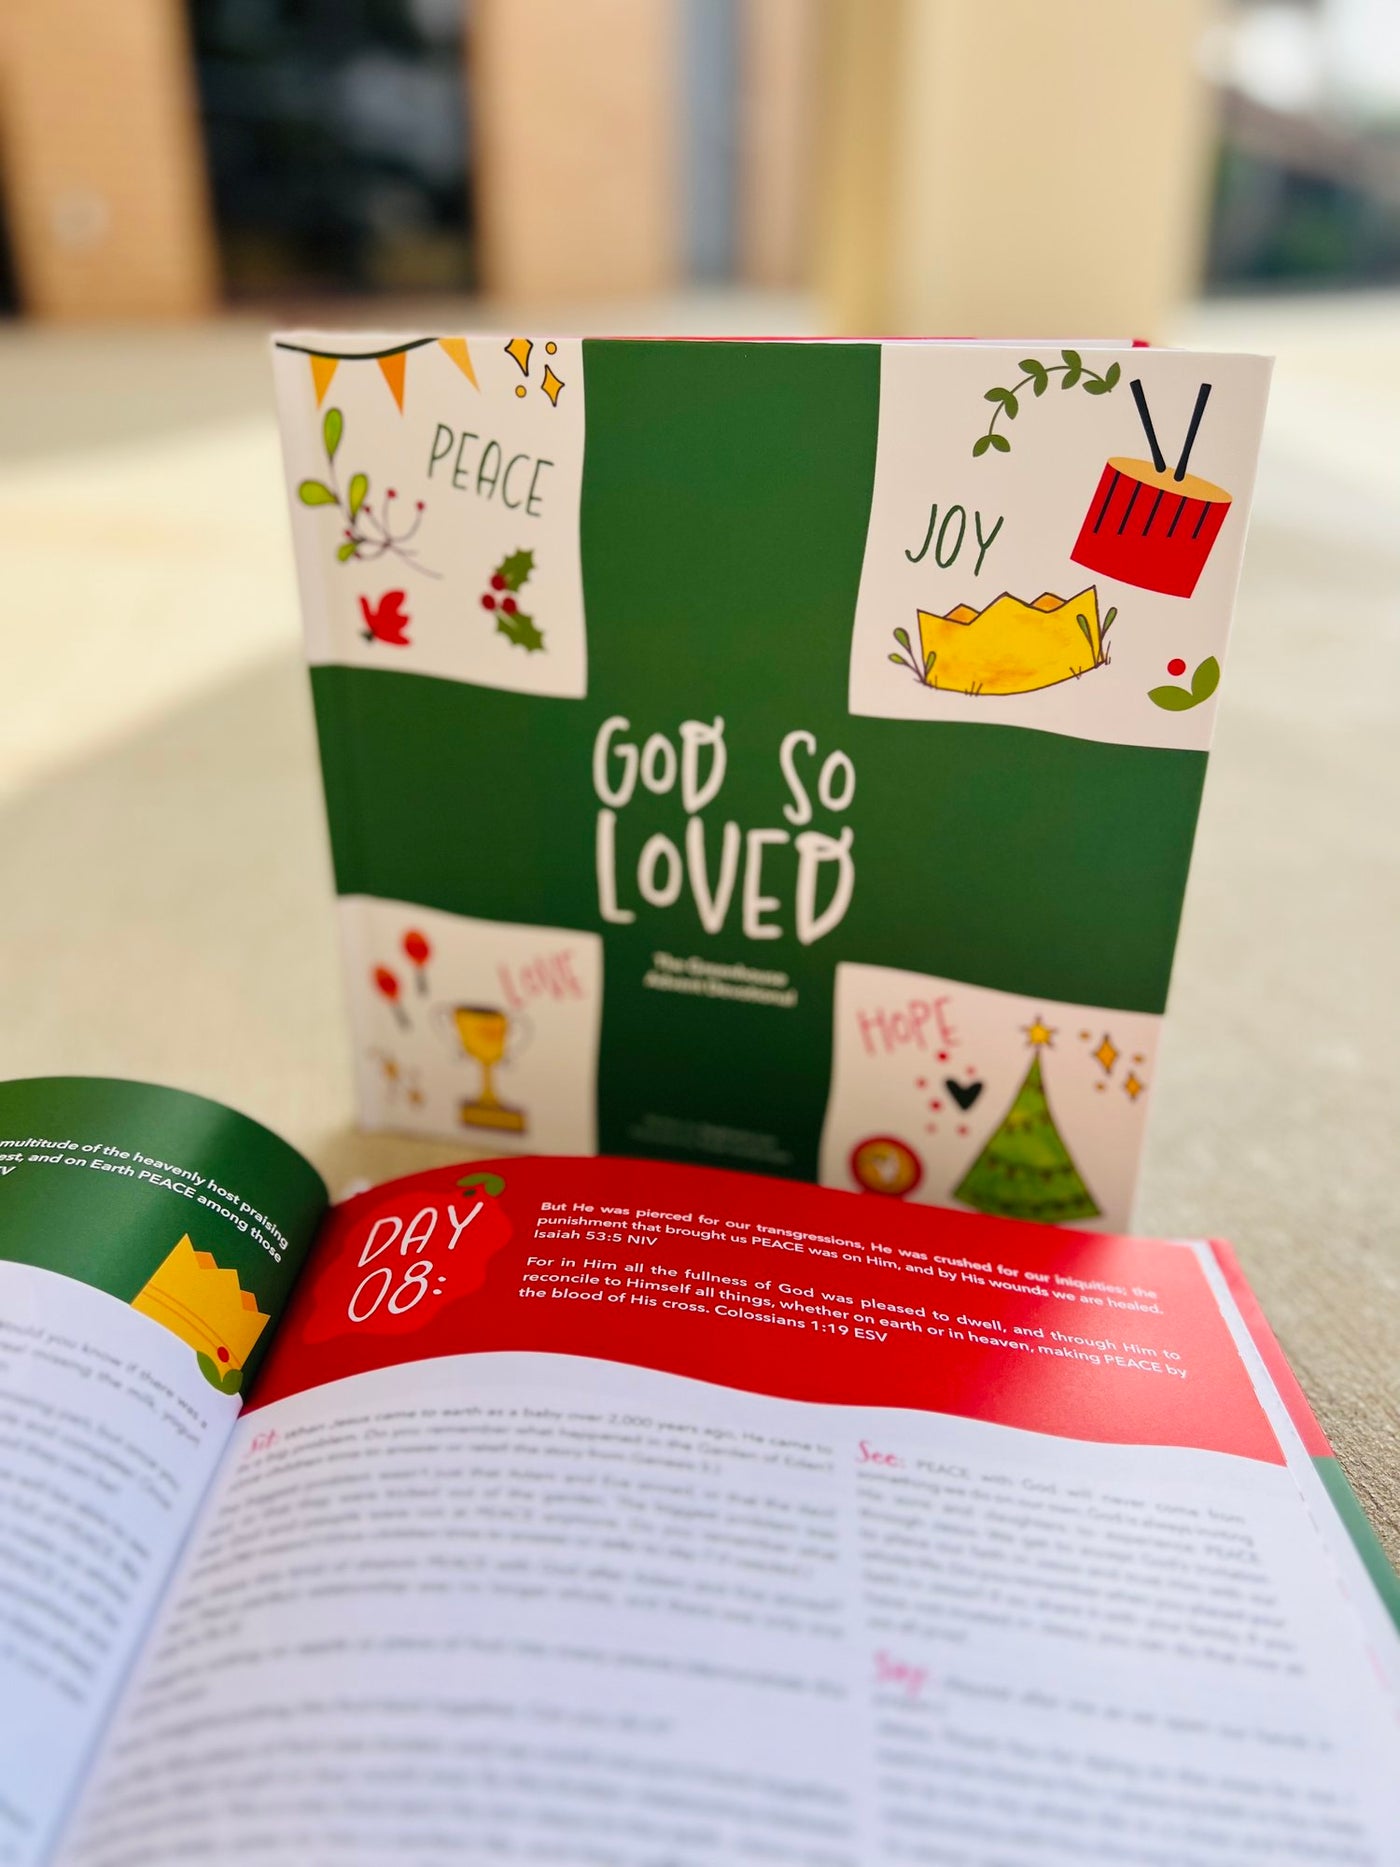 God So Loved - Advent Devotional Book & Video Series